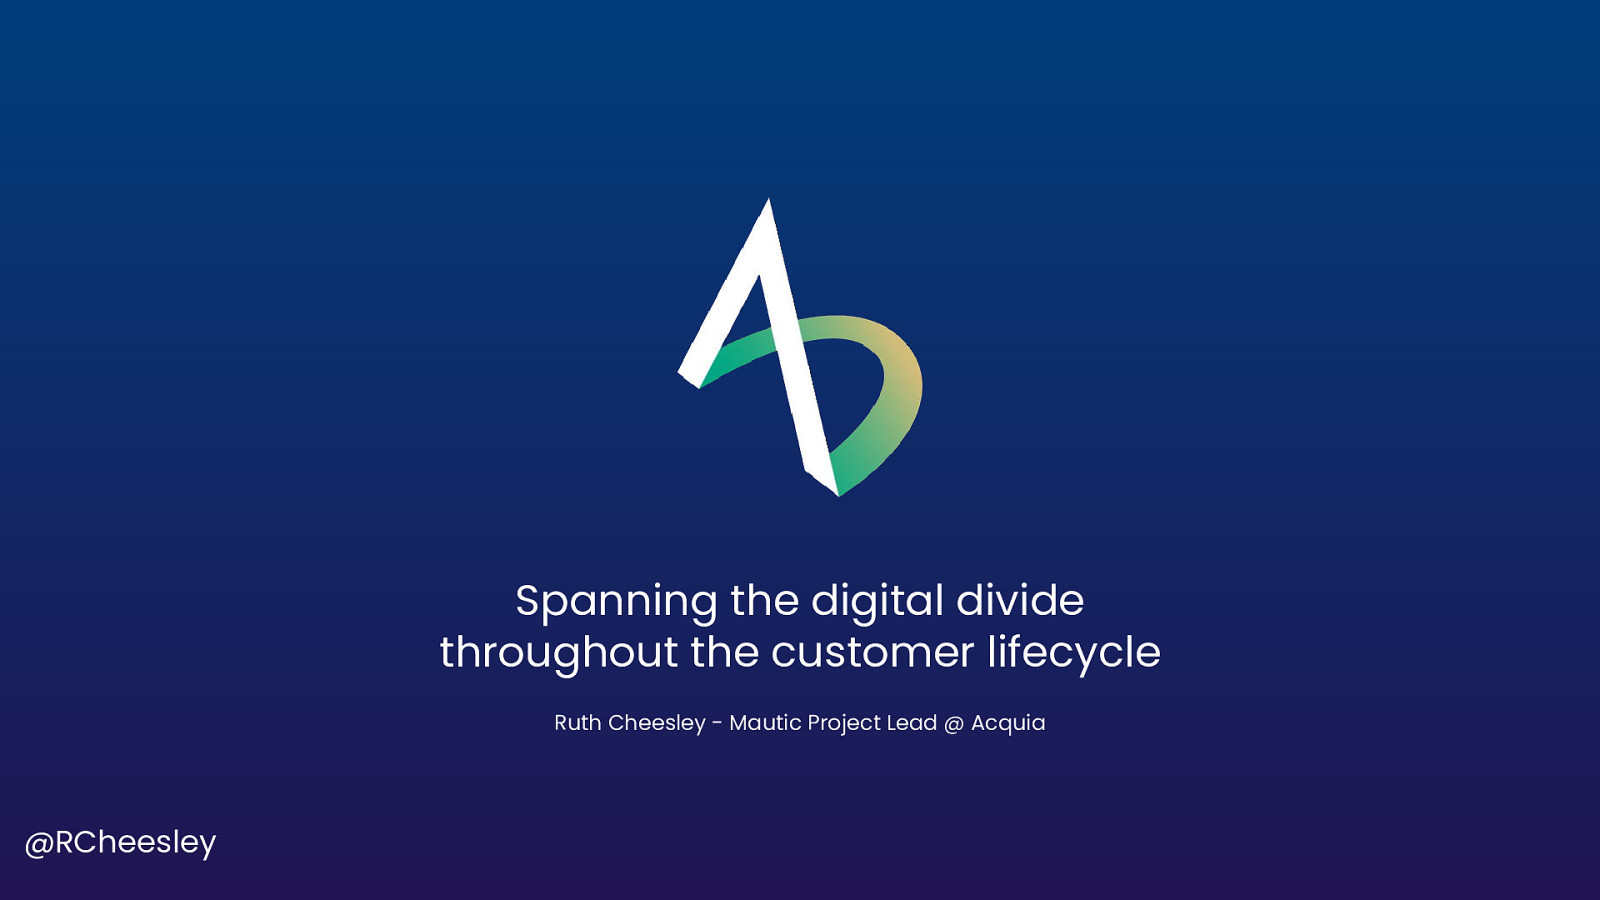 Spanning the digital divide throughout the customer lifecycle